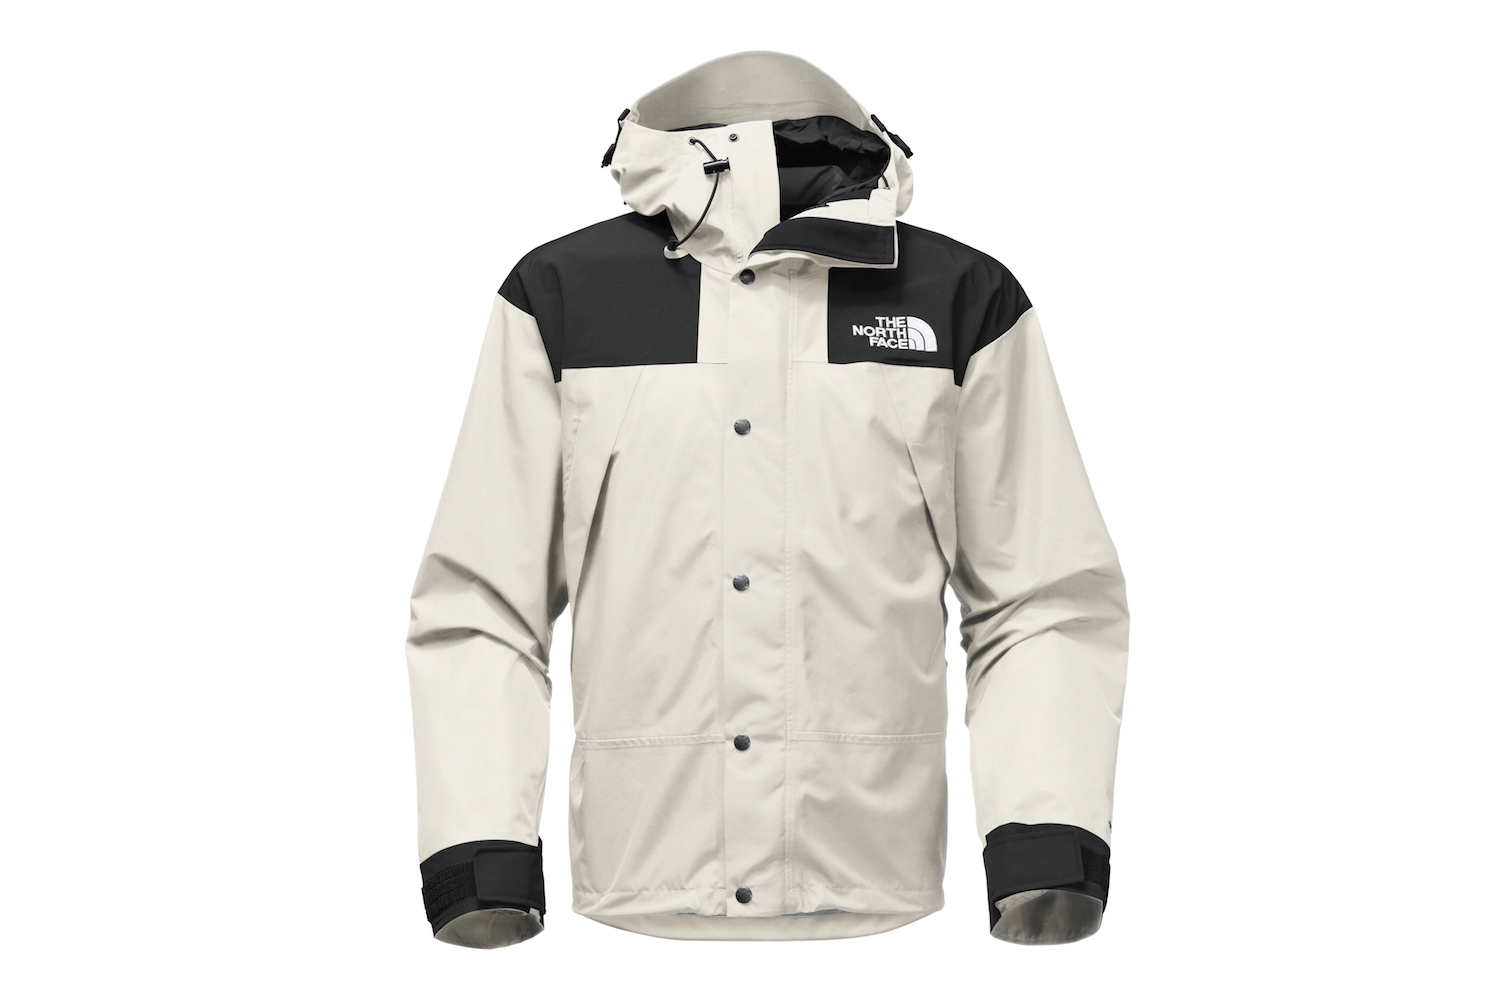 The North Face Retros Its Iconic 1990 Mountain Jacket